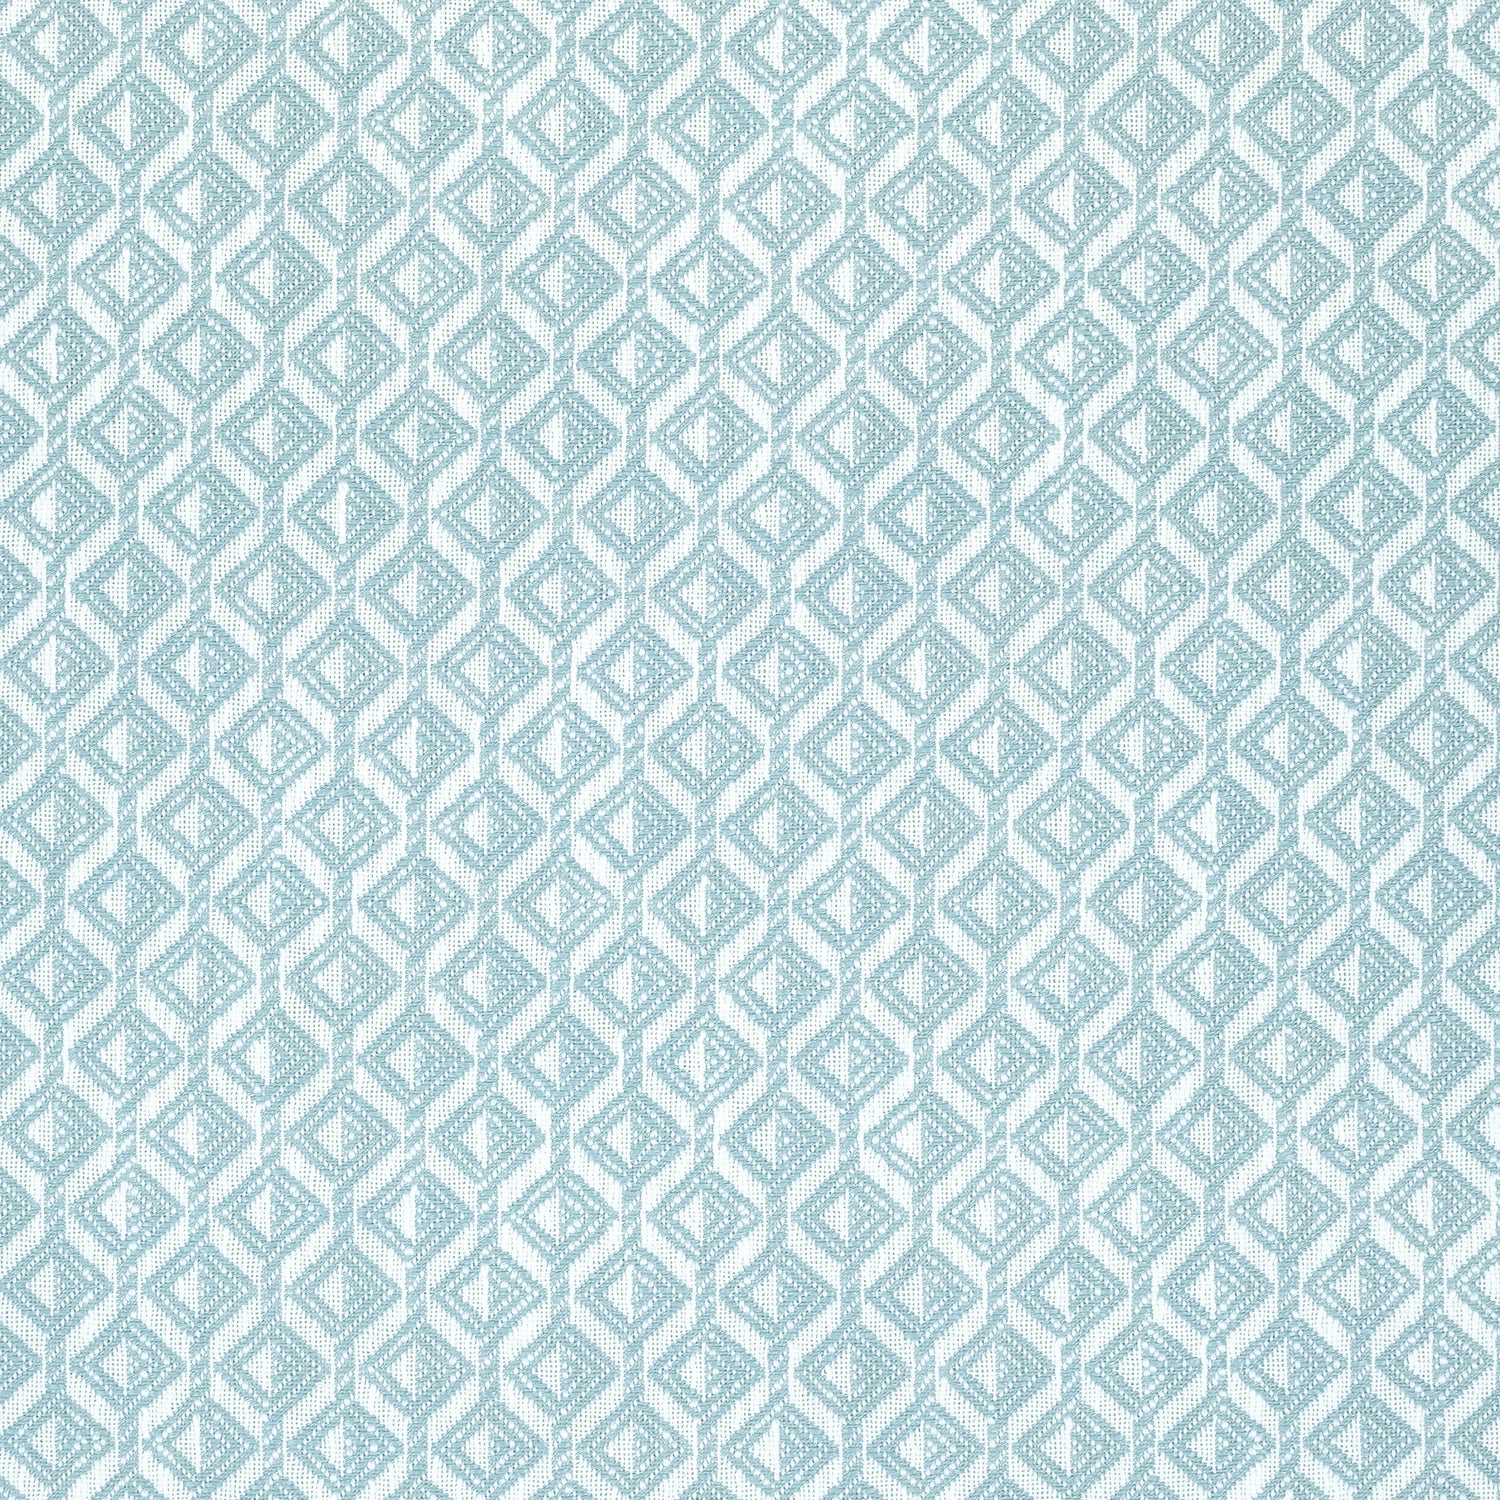 Trion fabric in aqua color - pattern number W73457 - by Thibaut in the Landmark collection